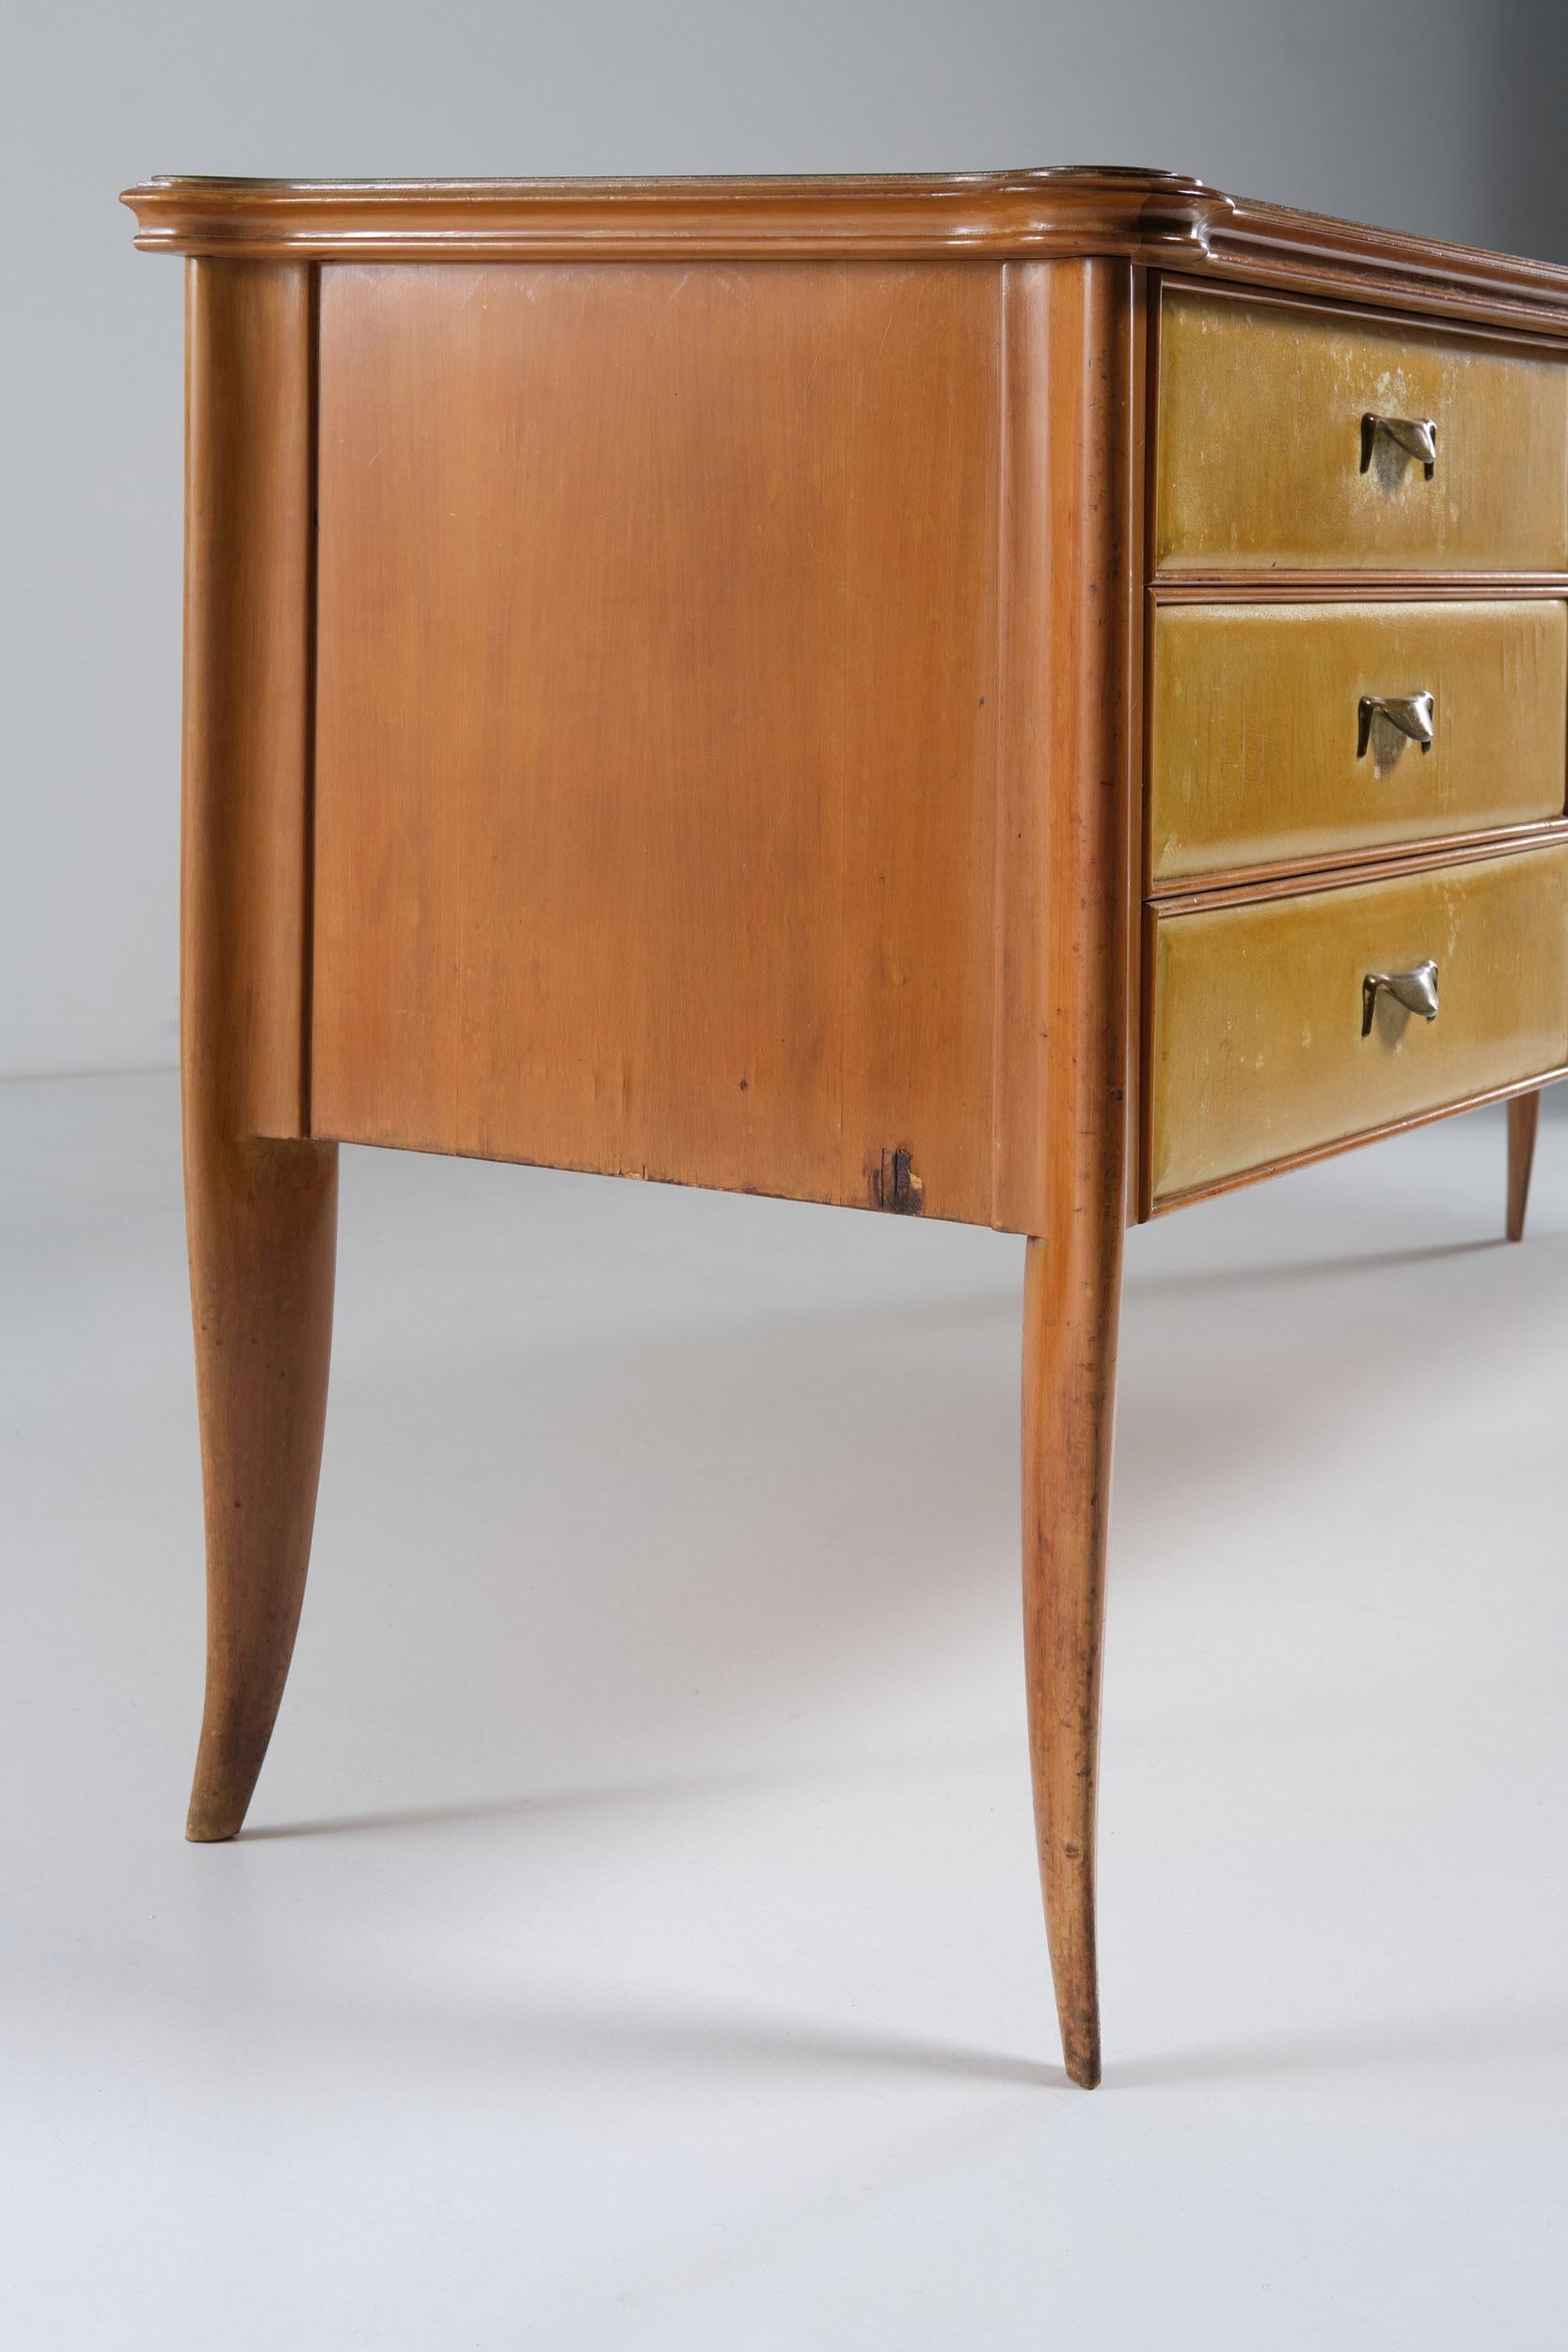 Paolo Buffa Large Sideboard in Wood, Brass and Glass Top, 1950s For Sale 7